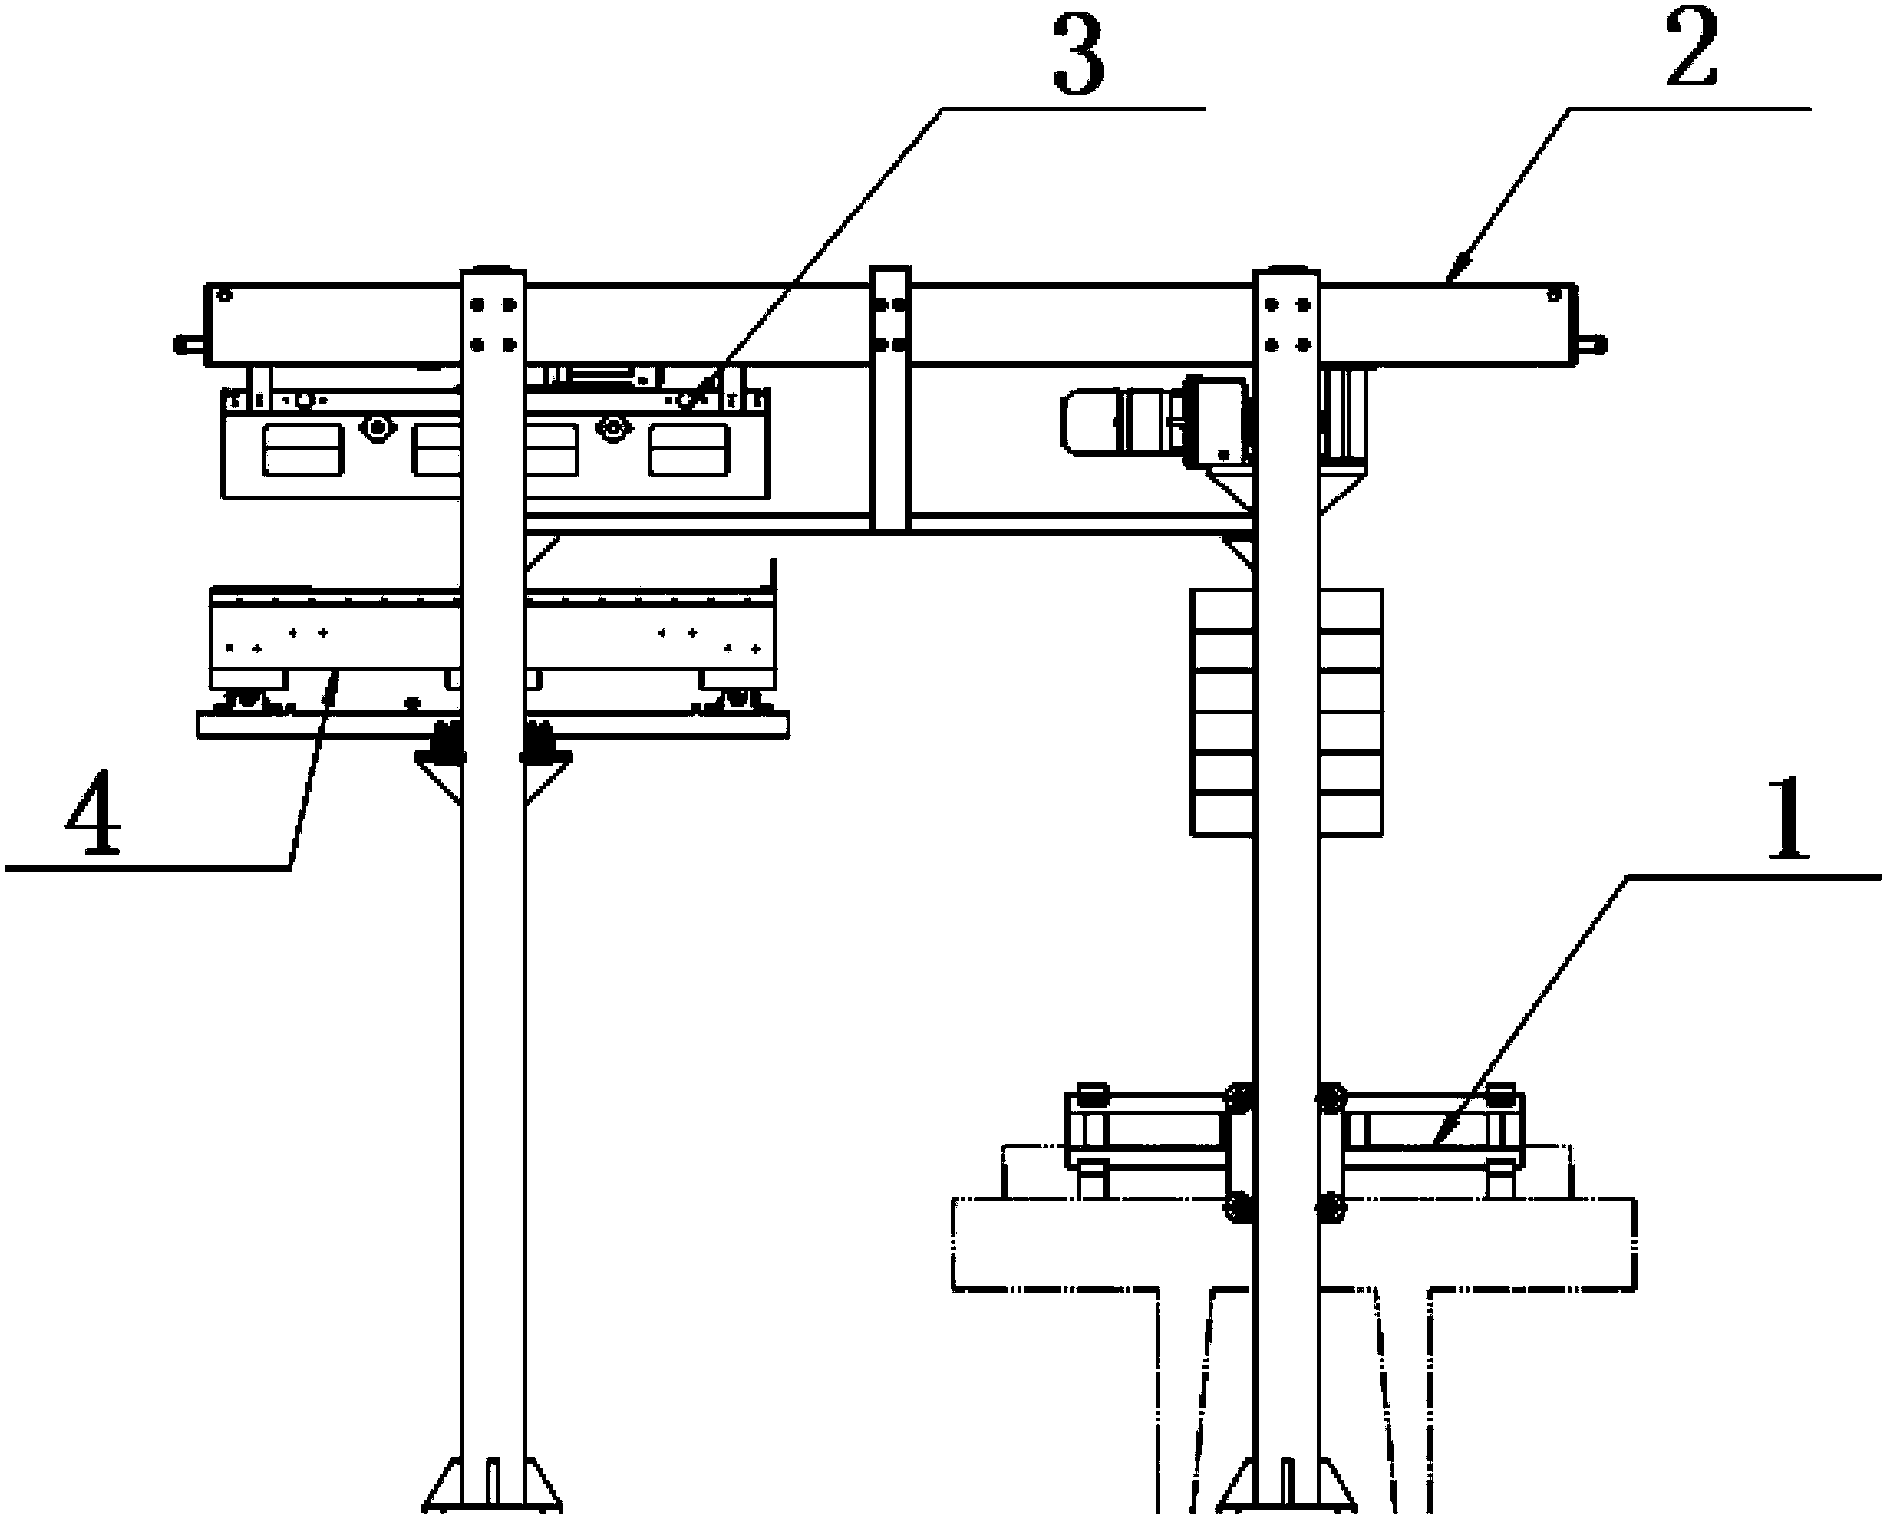 Automatic stacking system and operation control process